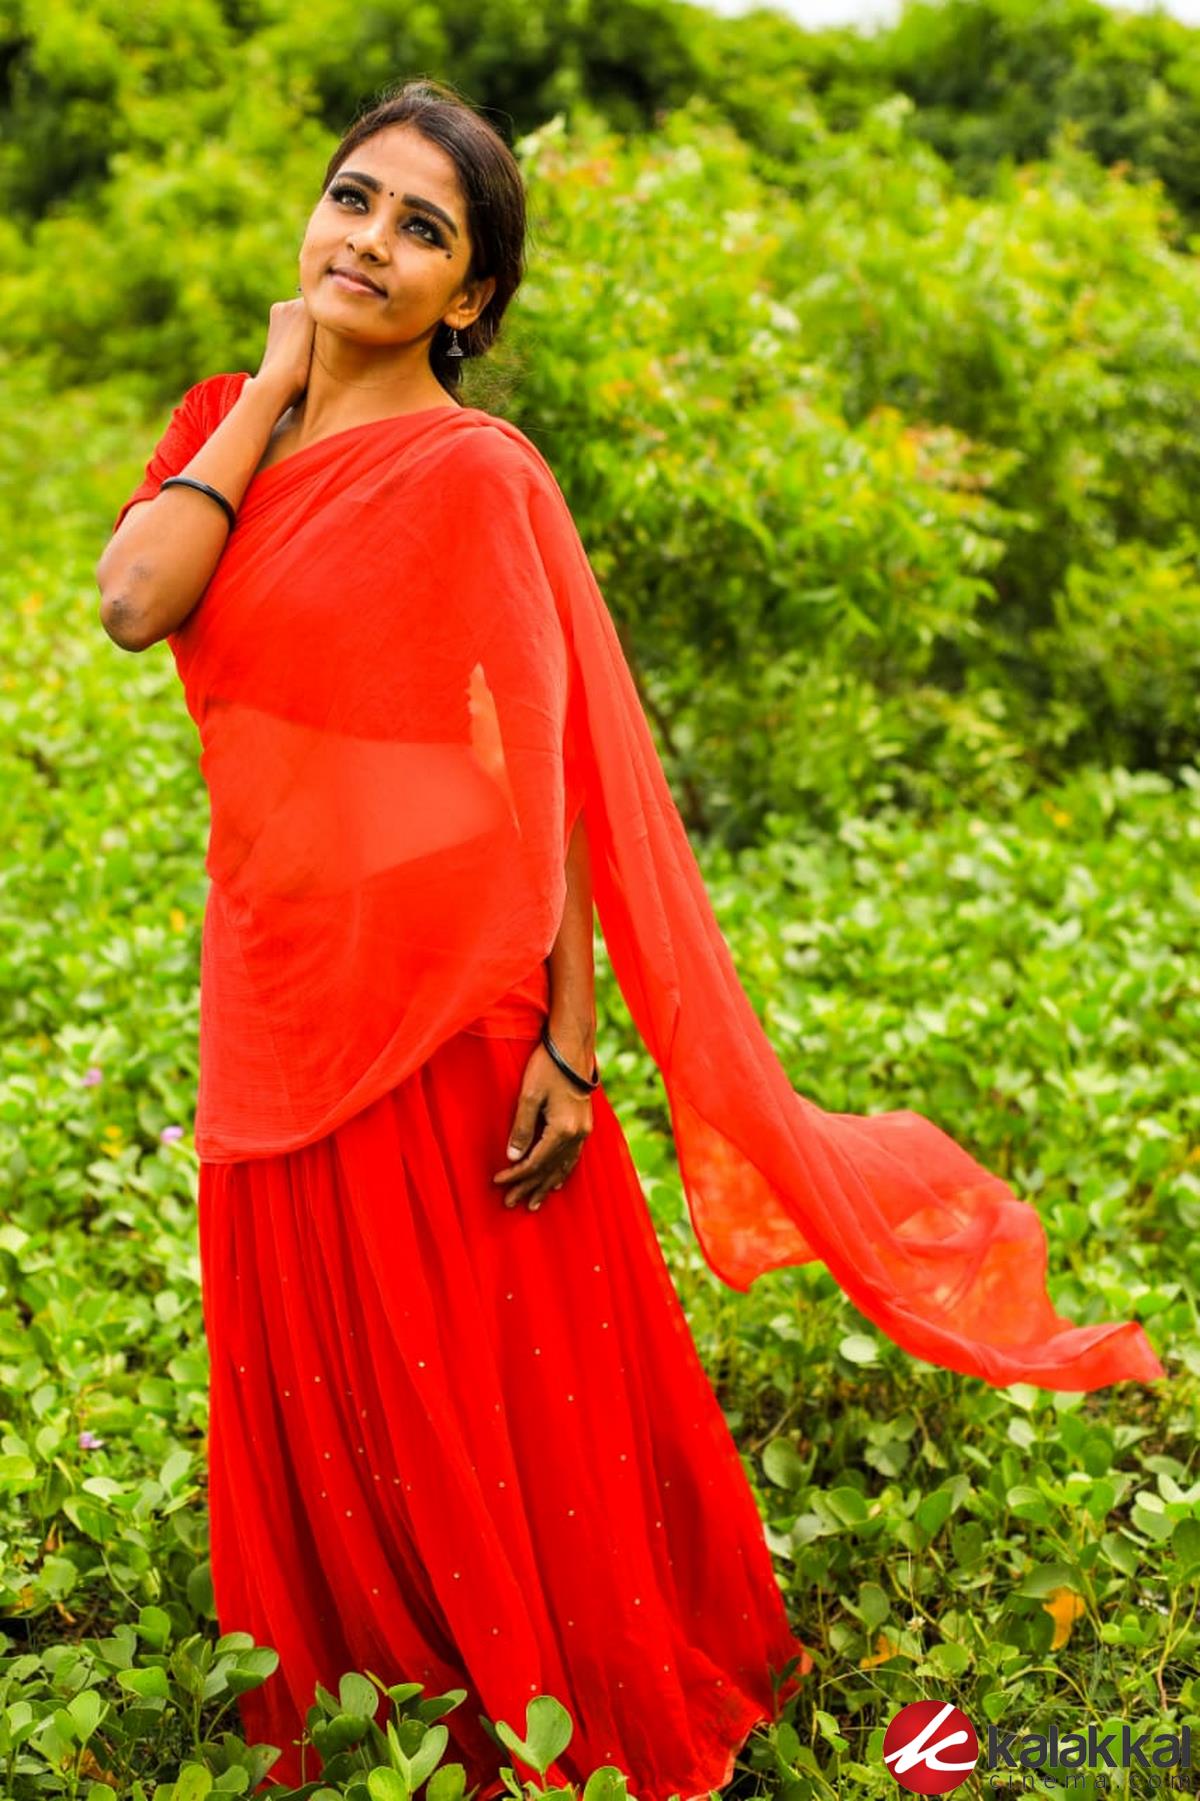 Actress Nimmy New Traditional Village Photoshoot Images